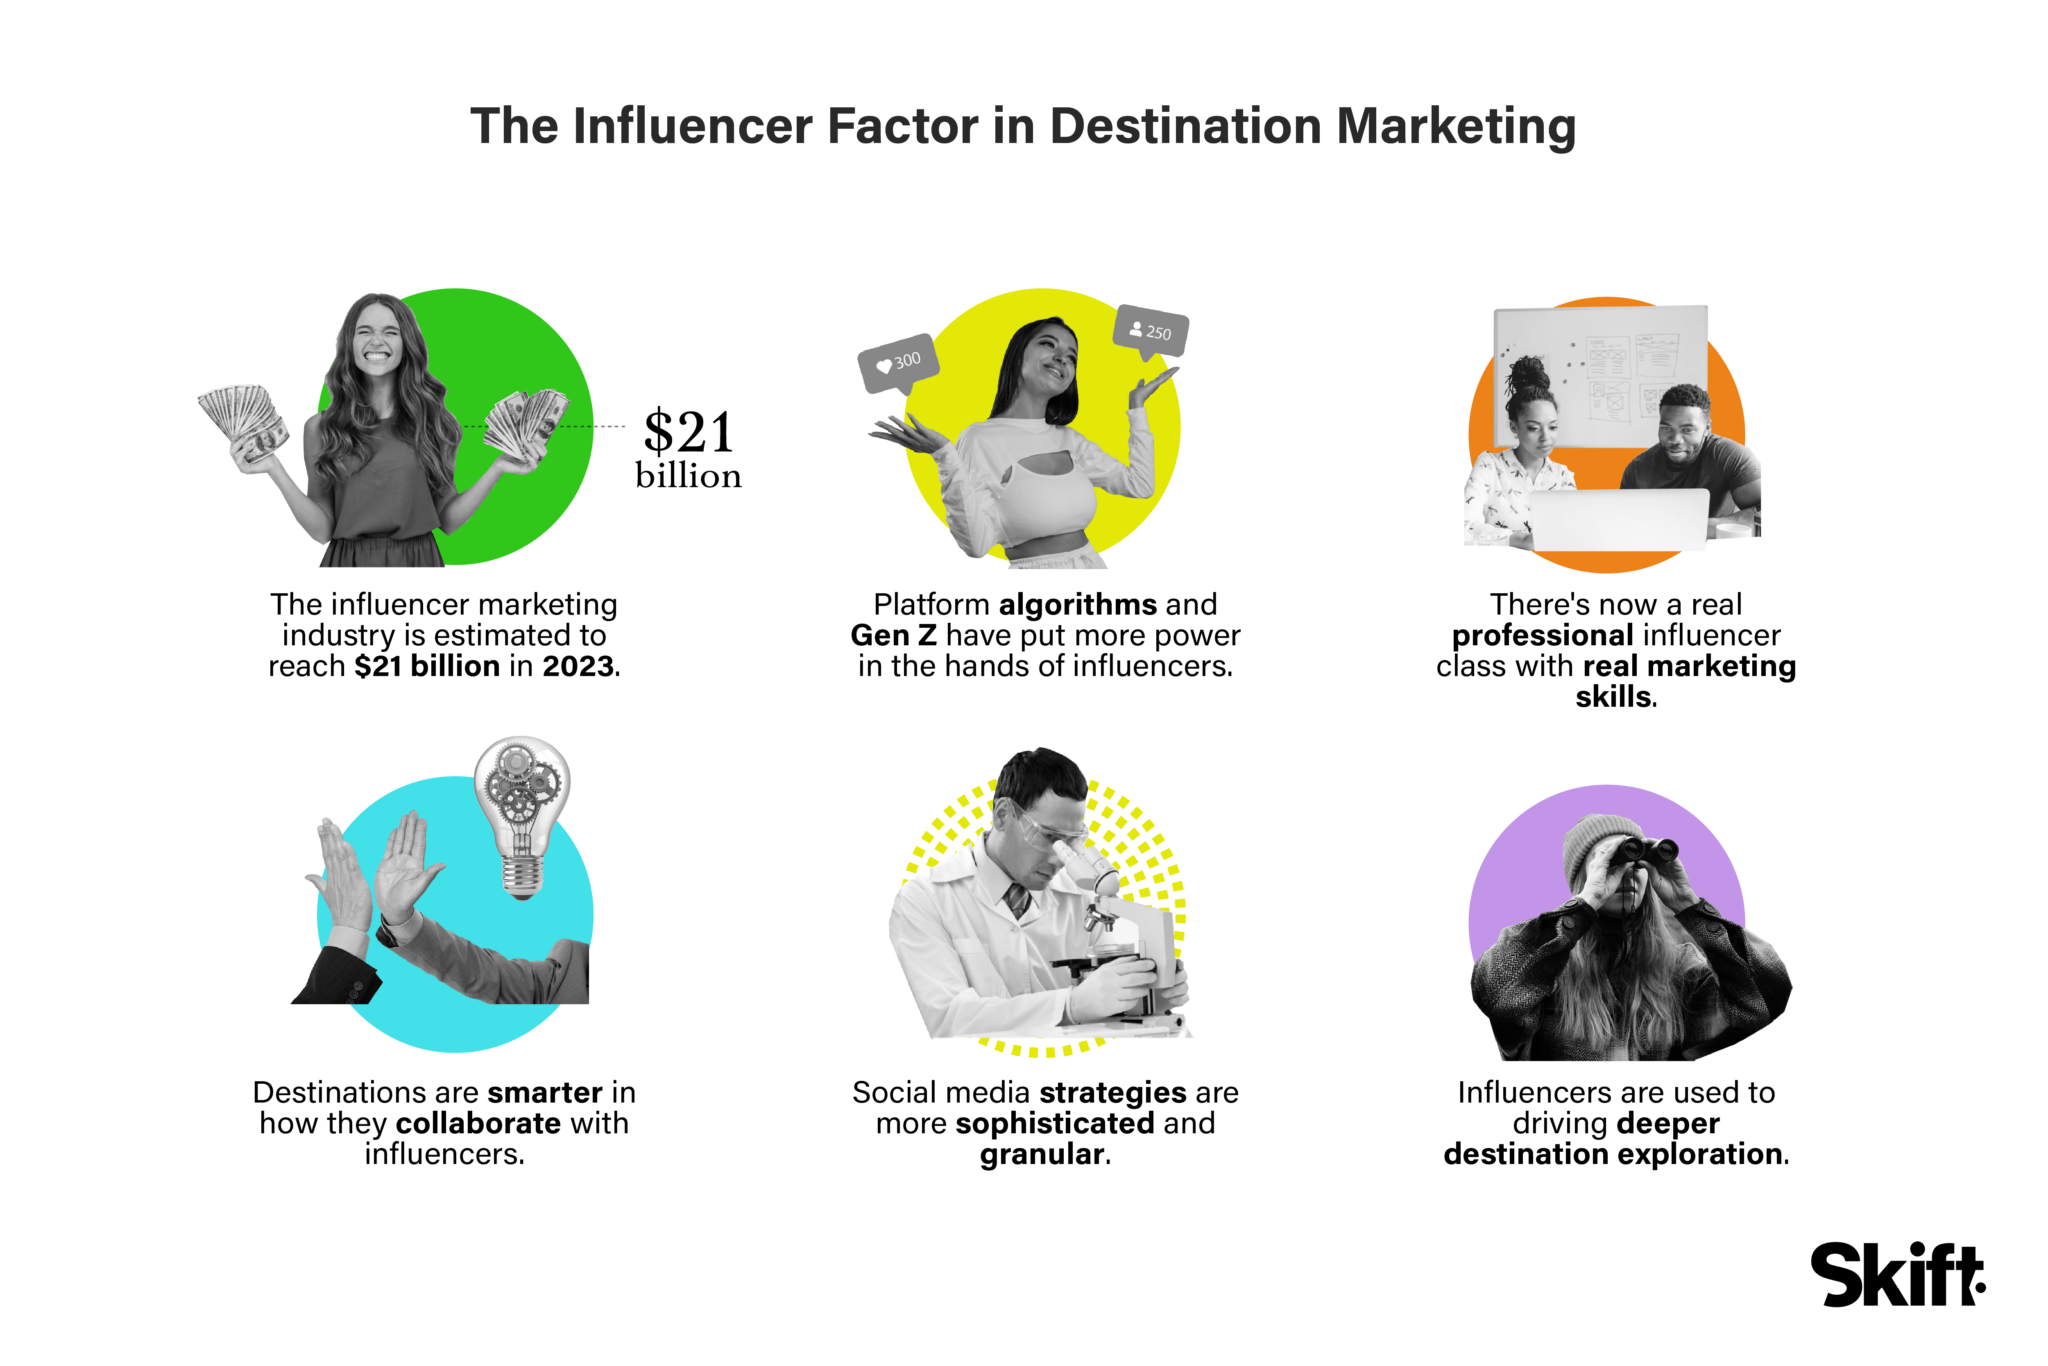 The Influencer Factor in Destination Marketing - pictograph showing the stats for each of the factors to consider for marketing strategies